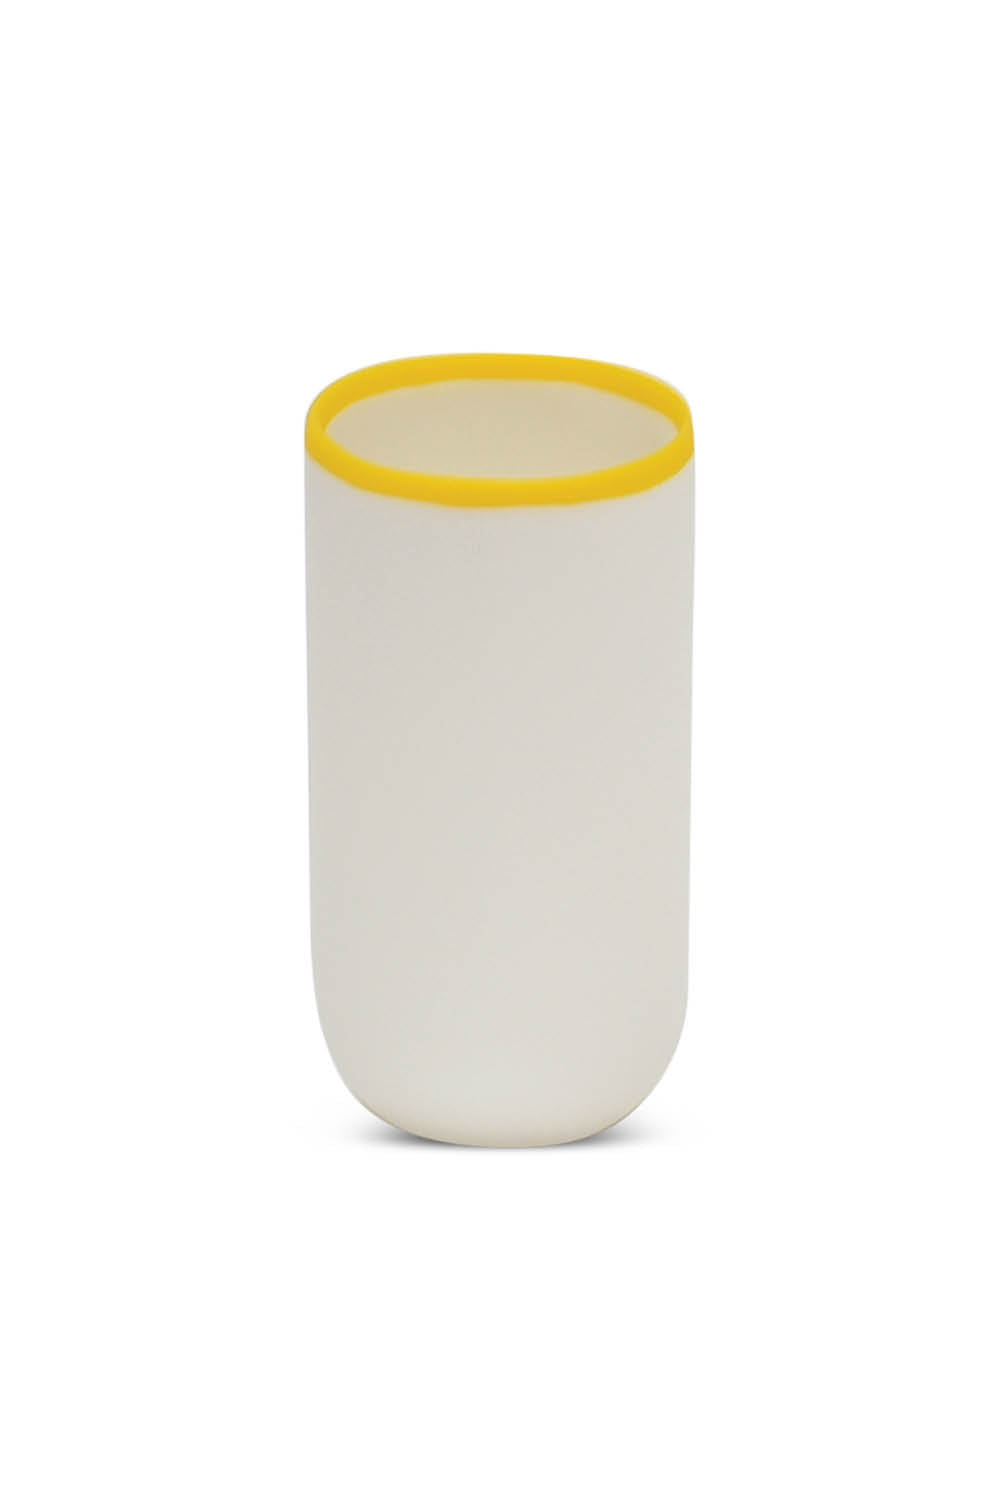 LIGNE Tall Cup in White With Sunshine Yellow Rim